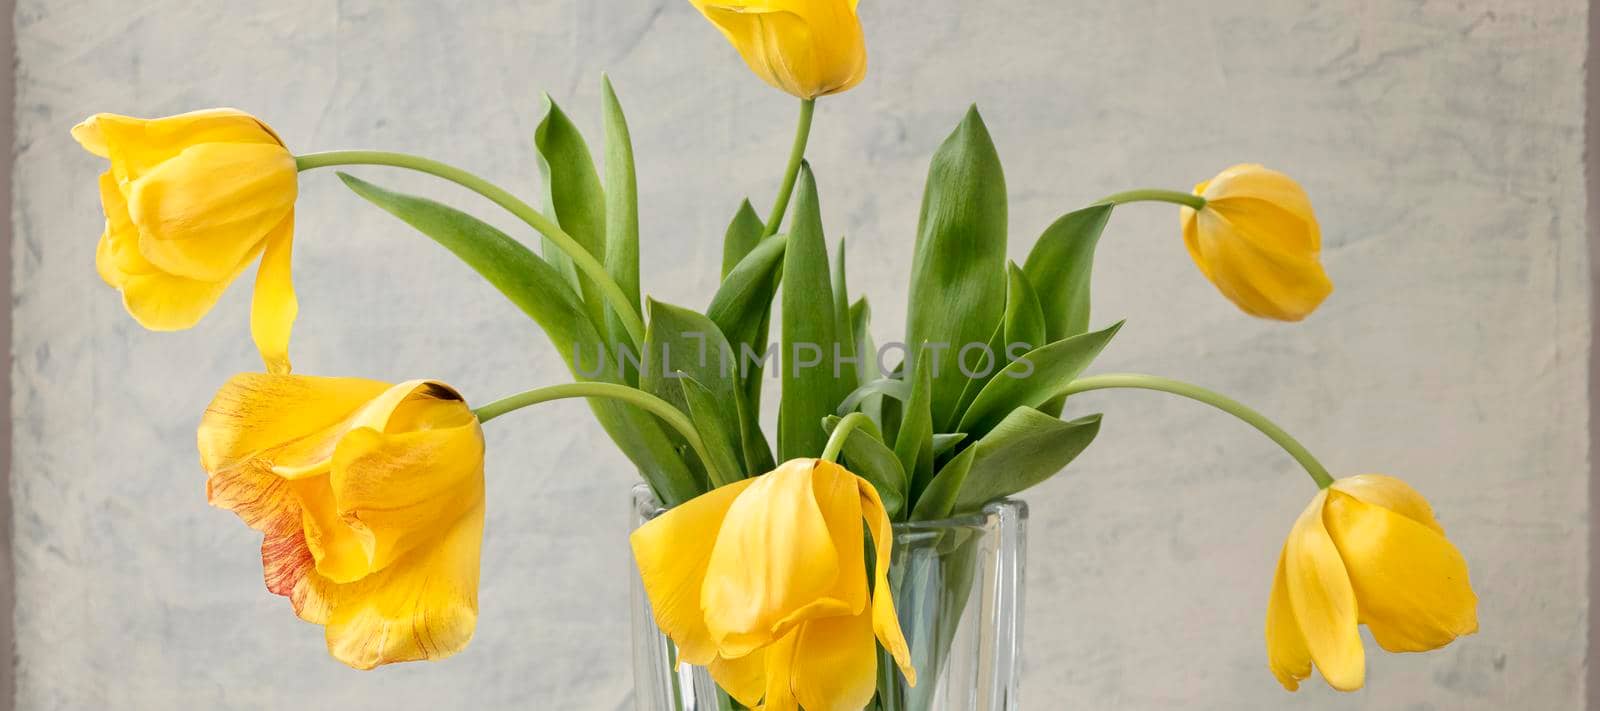 banner with bouquet of yellow tulips on gray textured background. Fading yellow tulips on gray background in transparent vase. by Leoschka